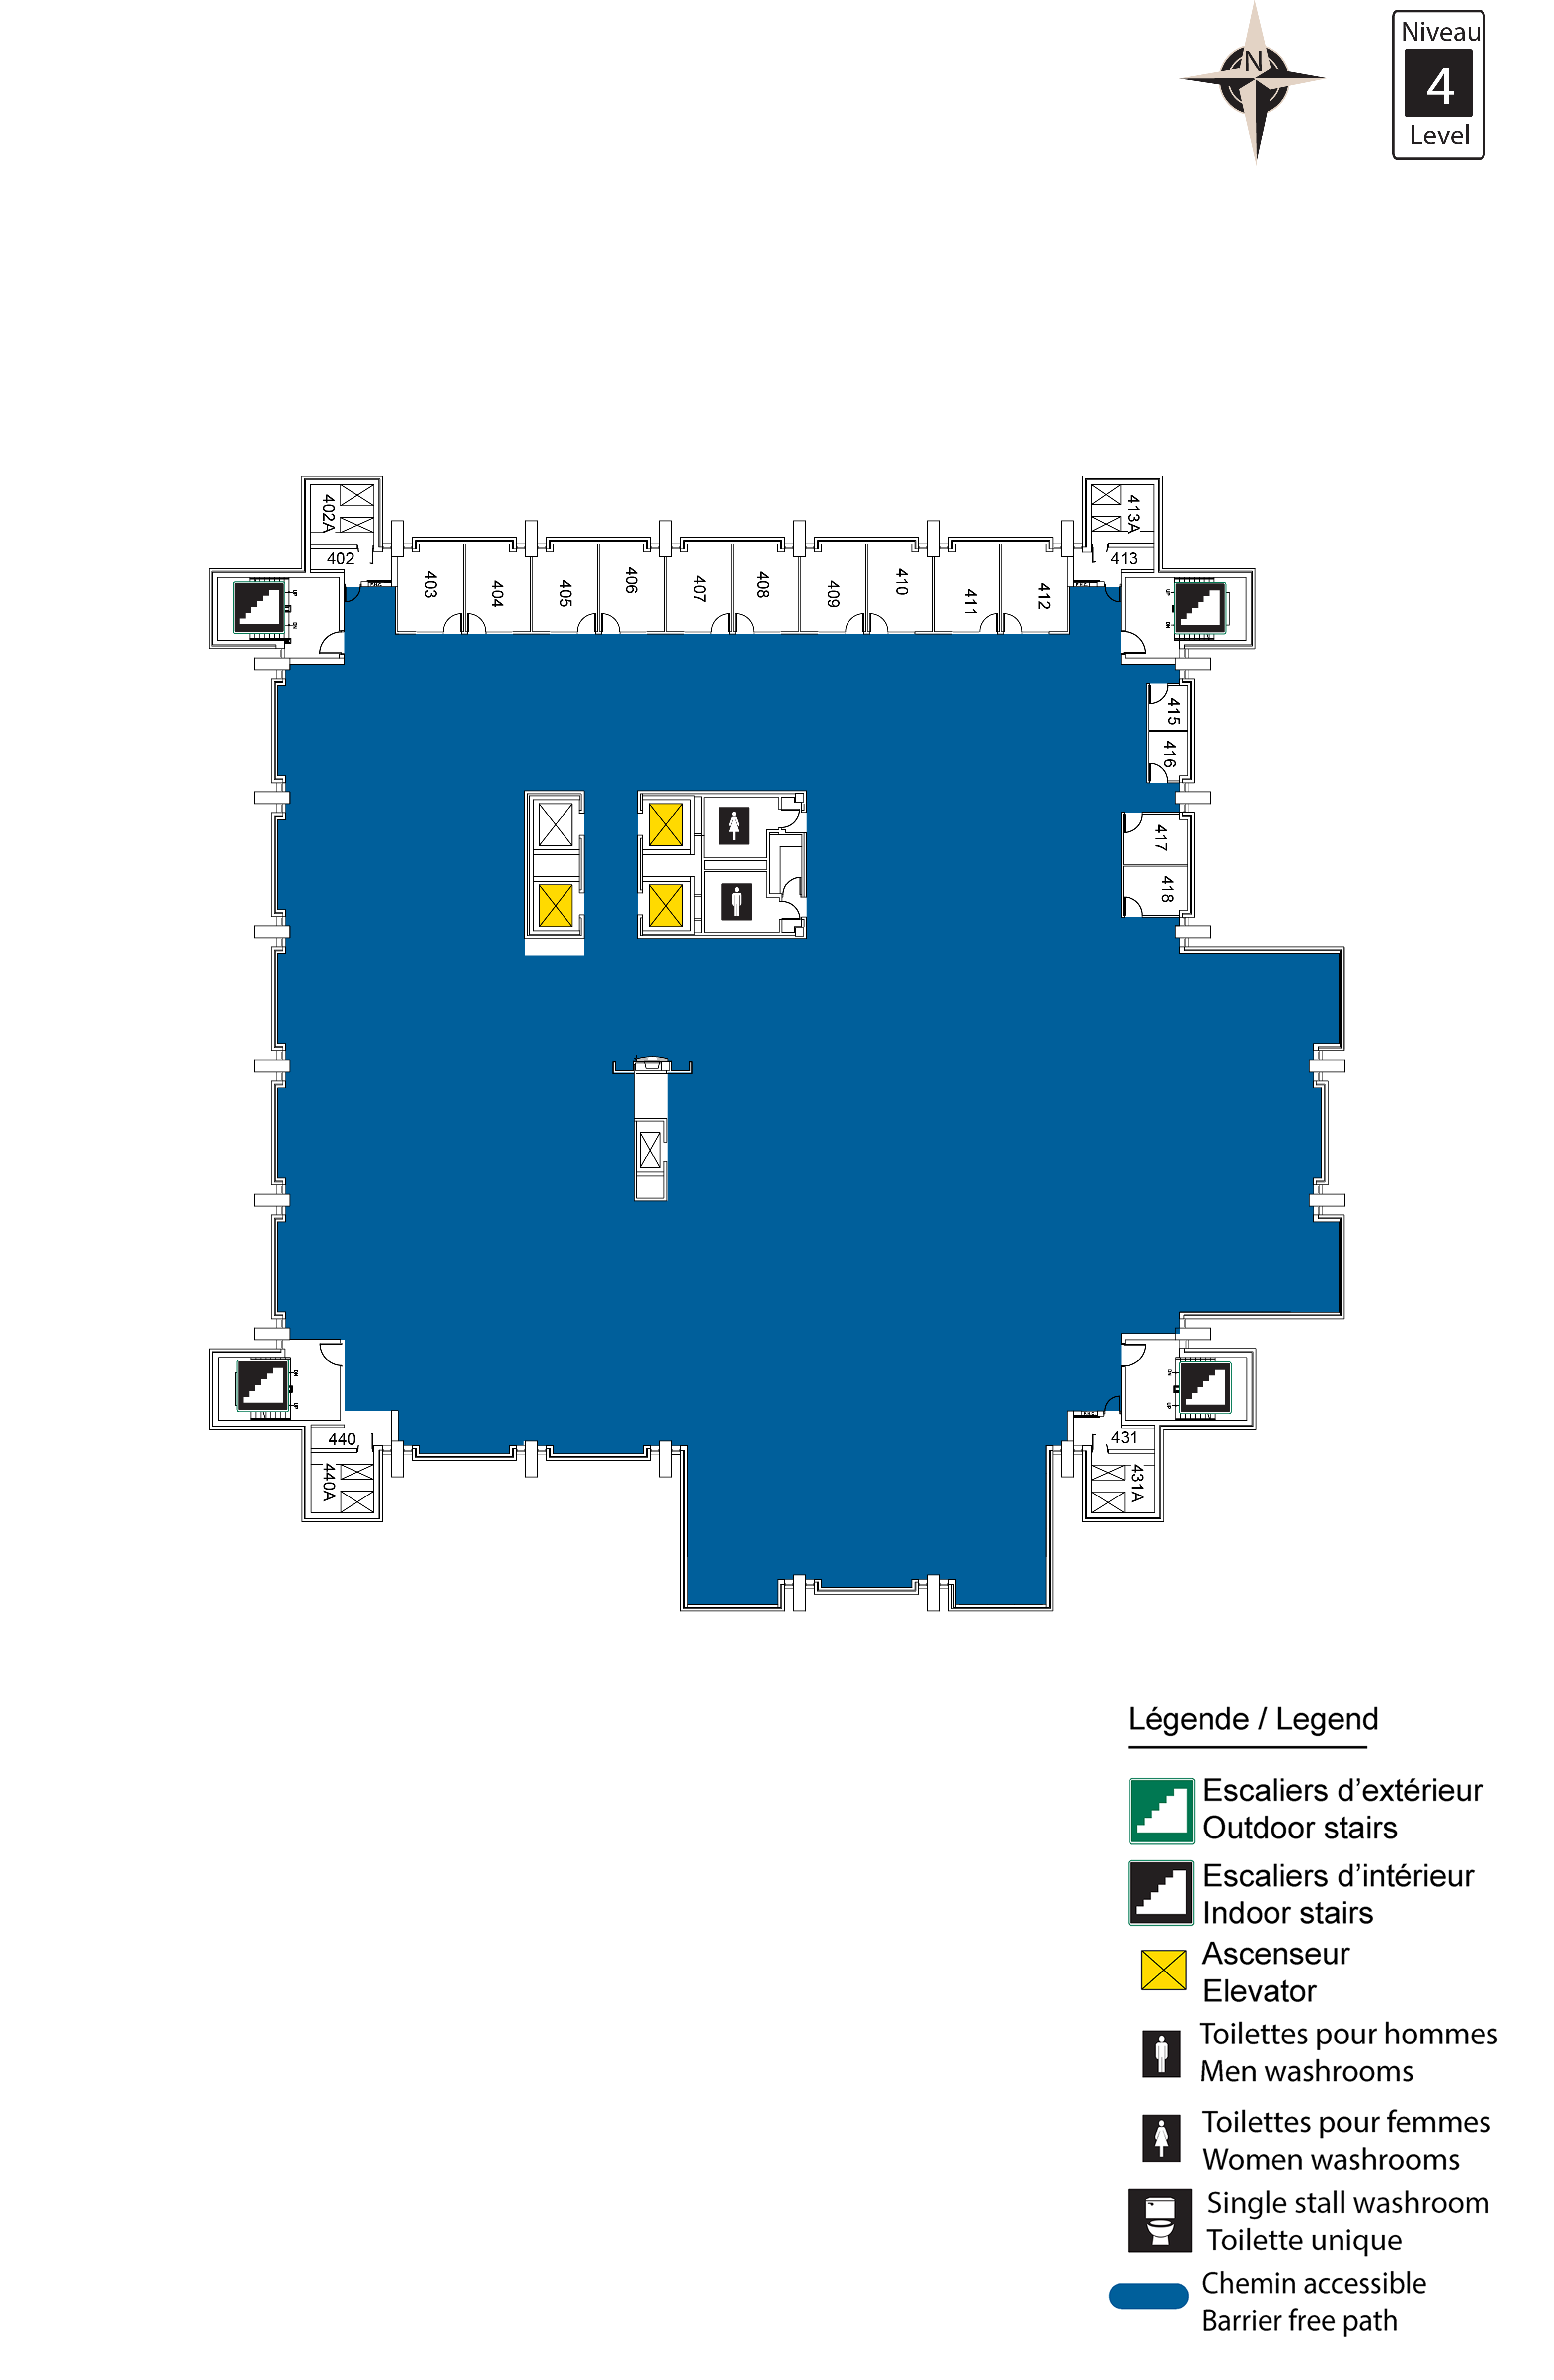 Accessible map of Morisset level 4